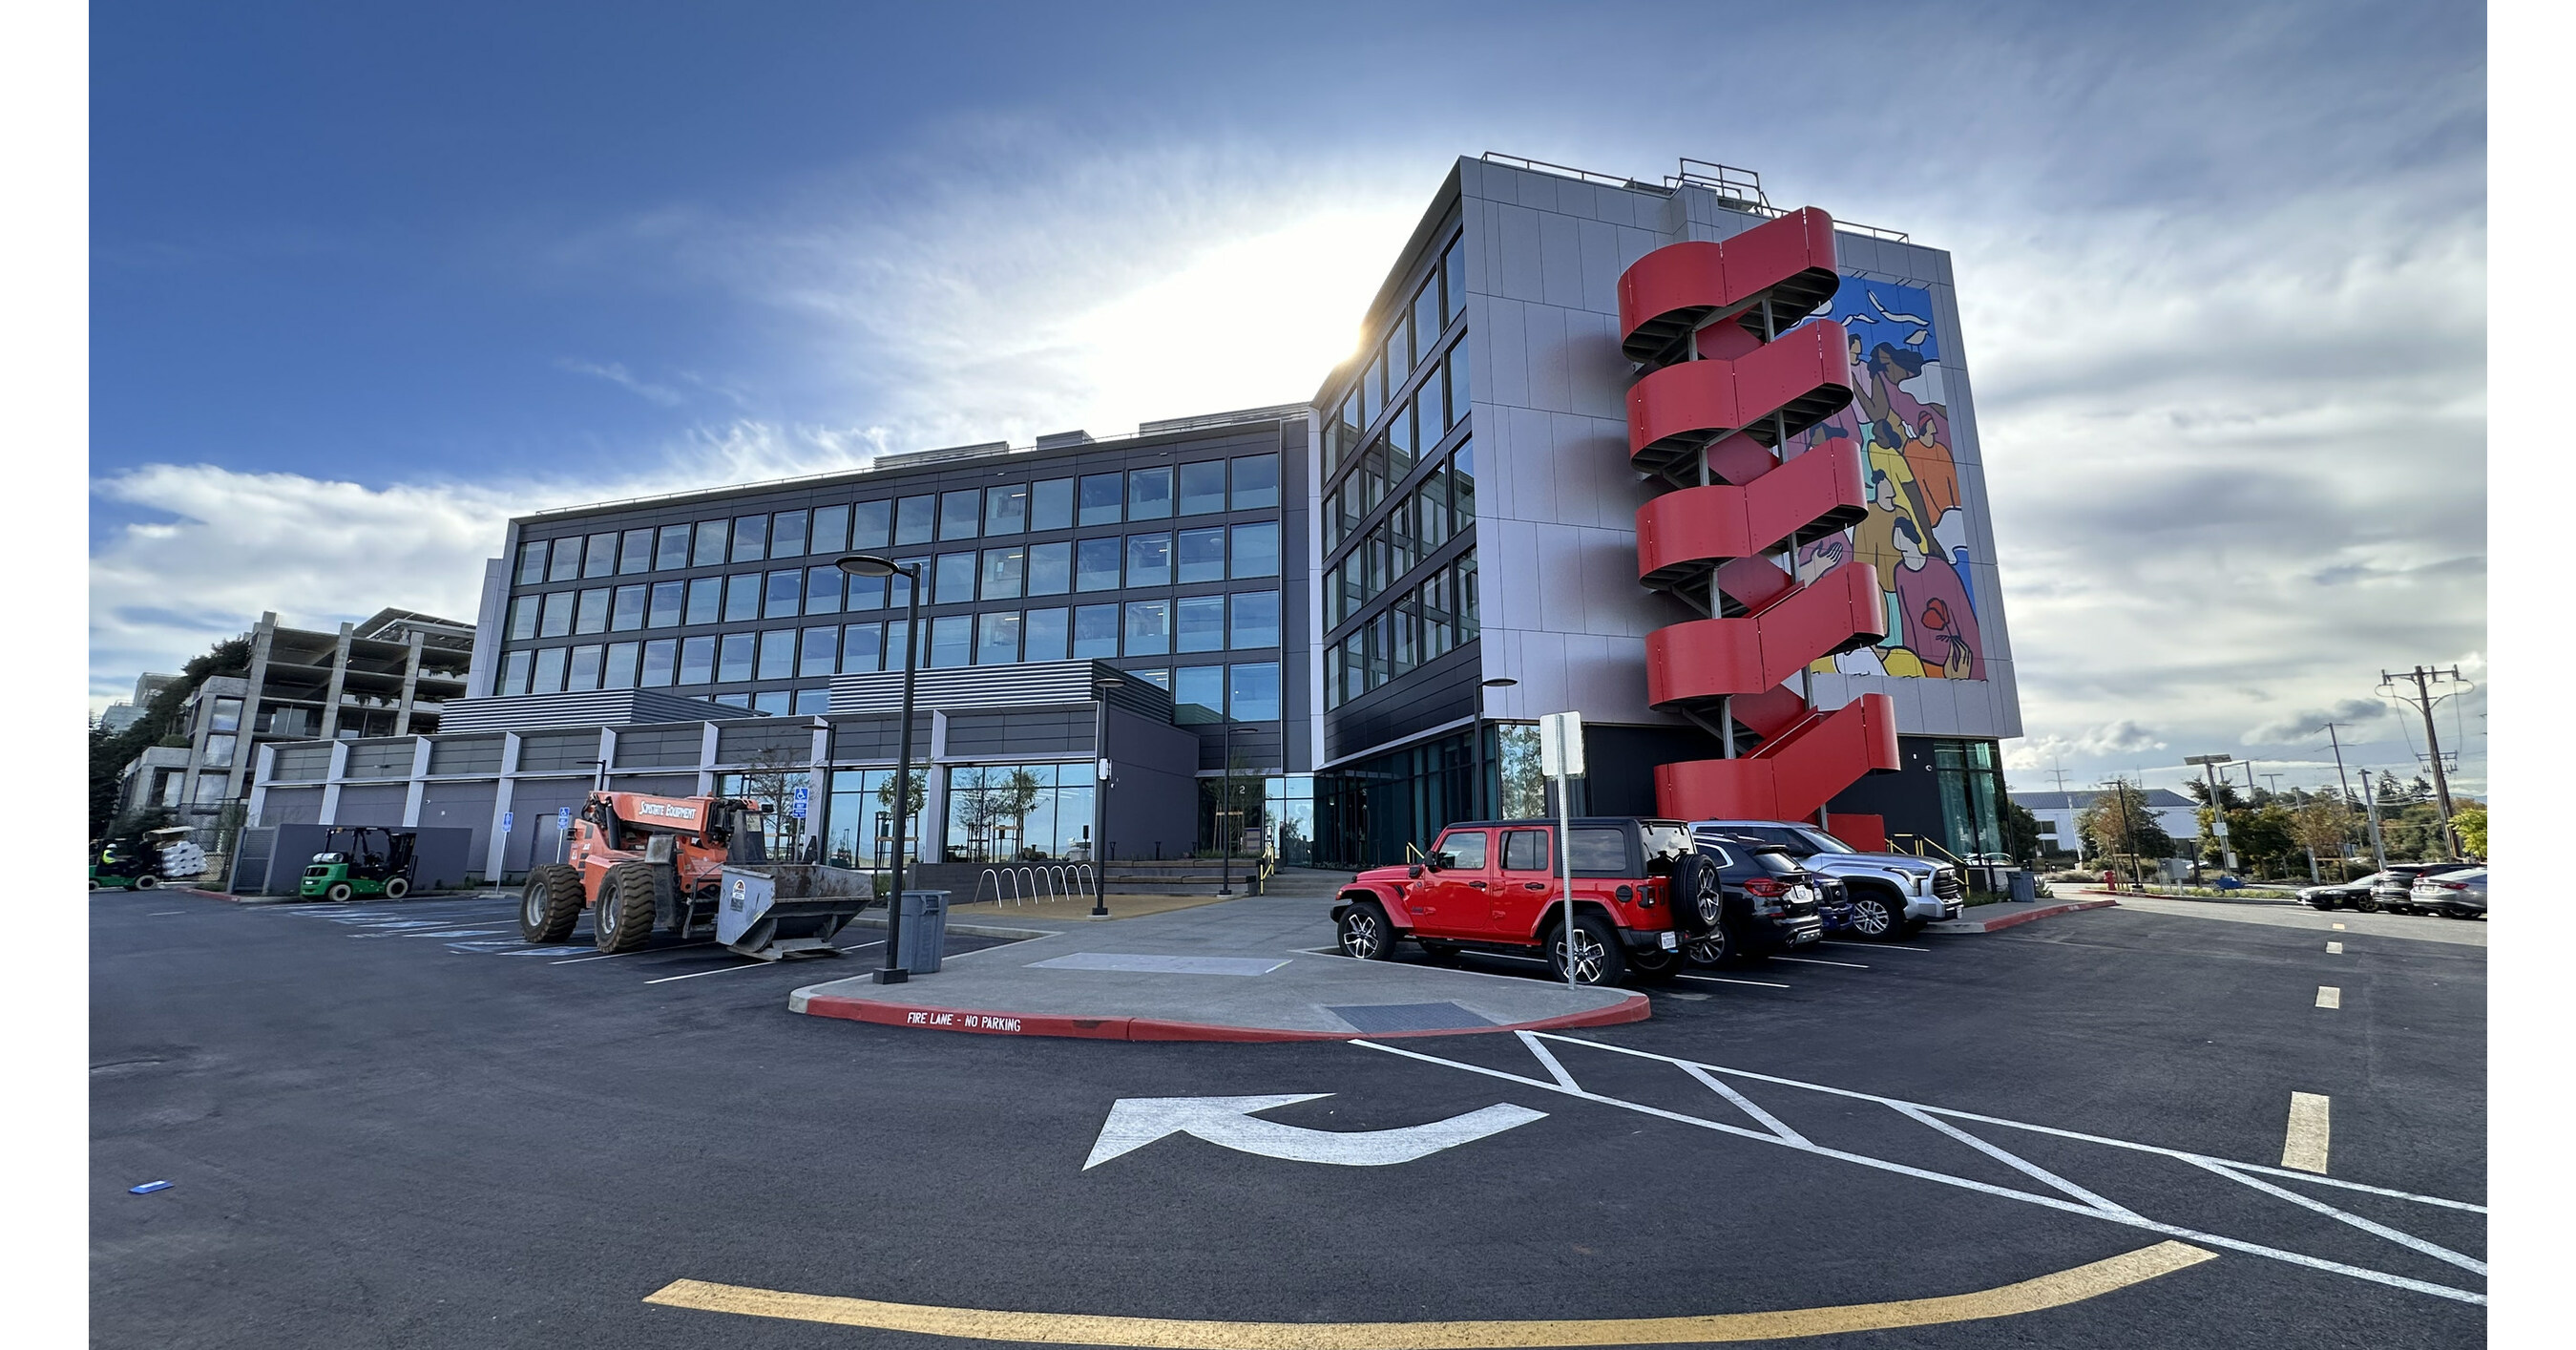 CitizenM Menlo Park Lodge collectively constructed by CIMC Group has formally opened in Silicon Valley, USA